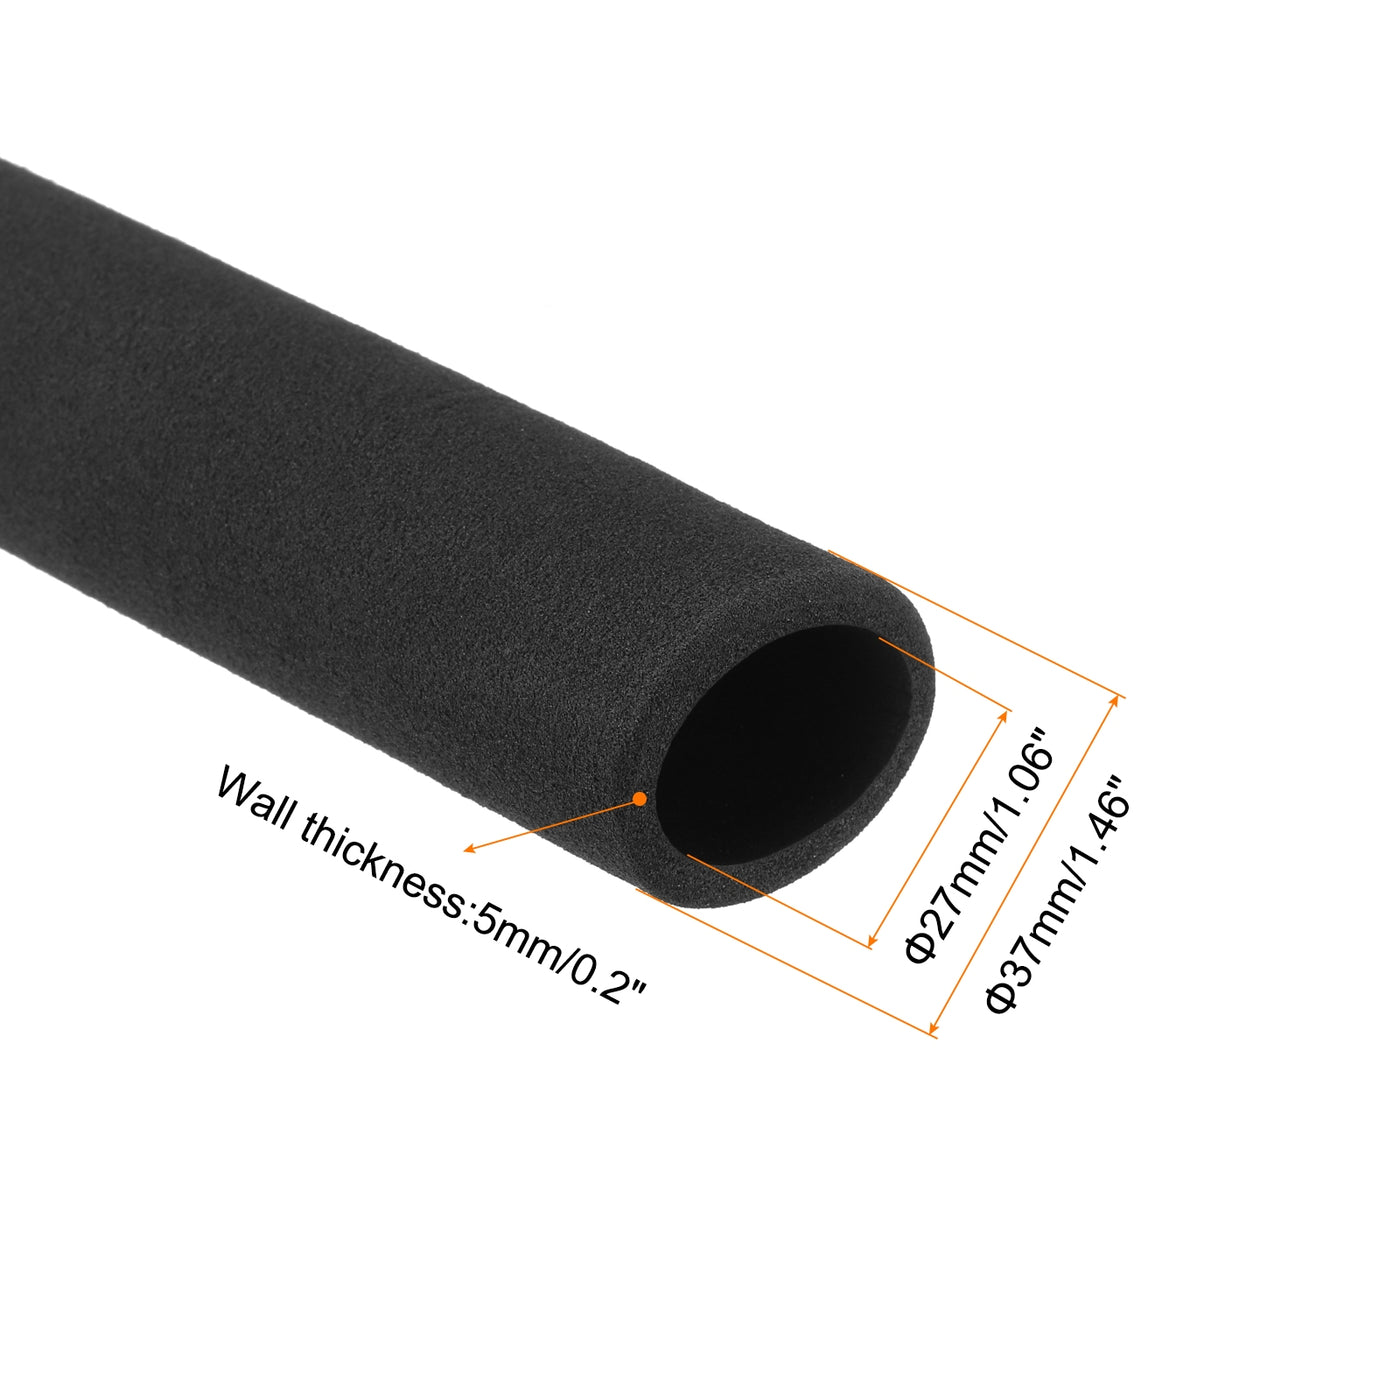 uxcell Uxcell Pipe Insulation Tube Foam Tubing for Handle Grip Support 27mm ID 37mm OD 195mm Heat Preservation Black 2pcs